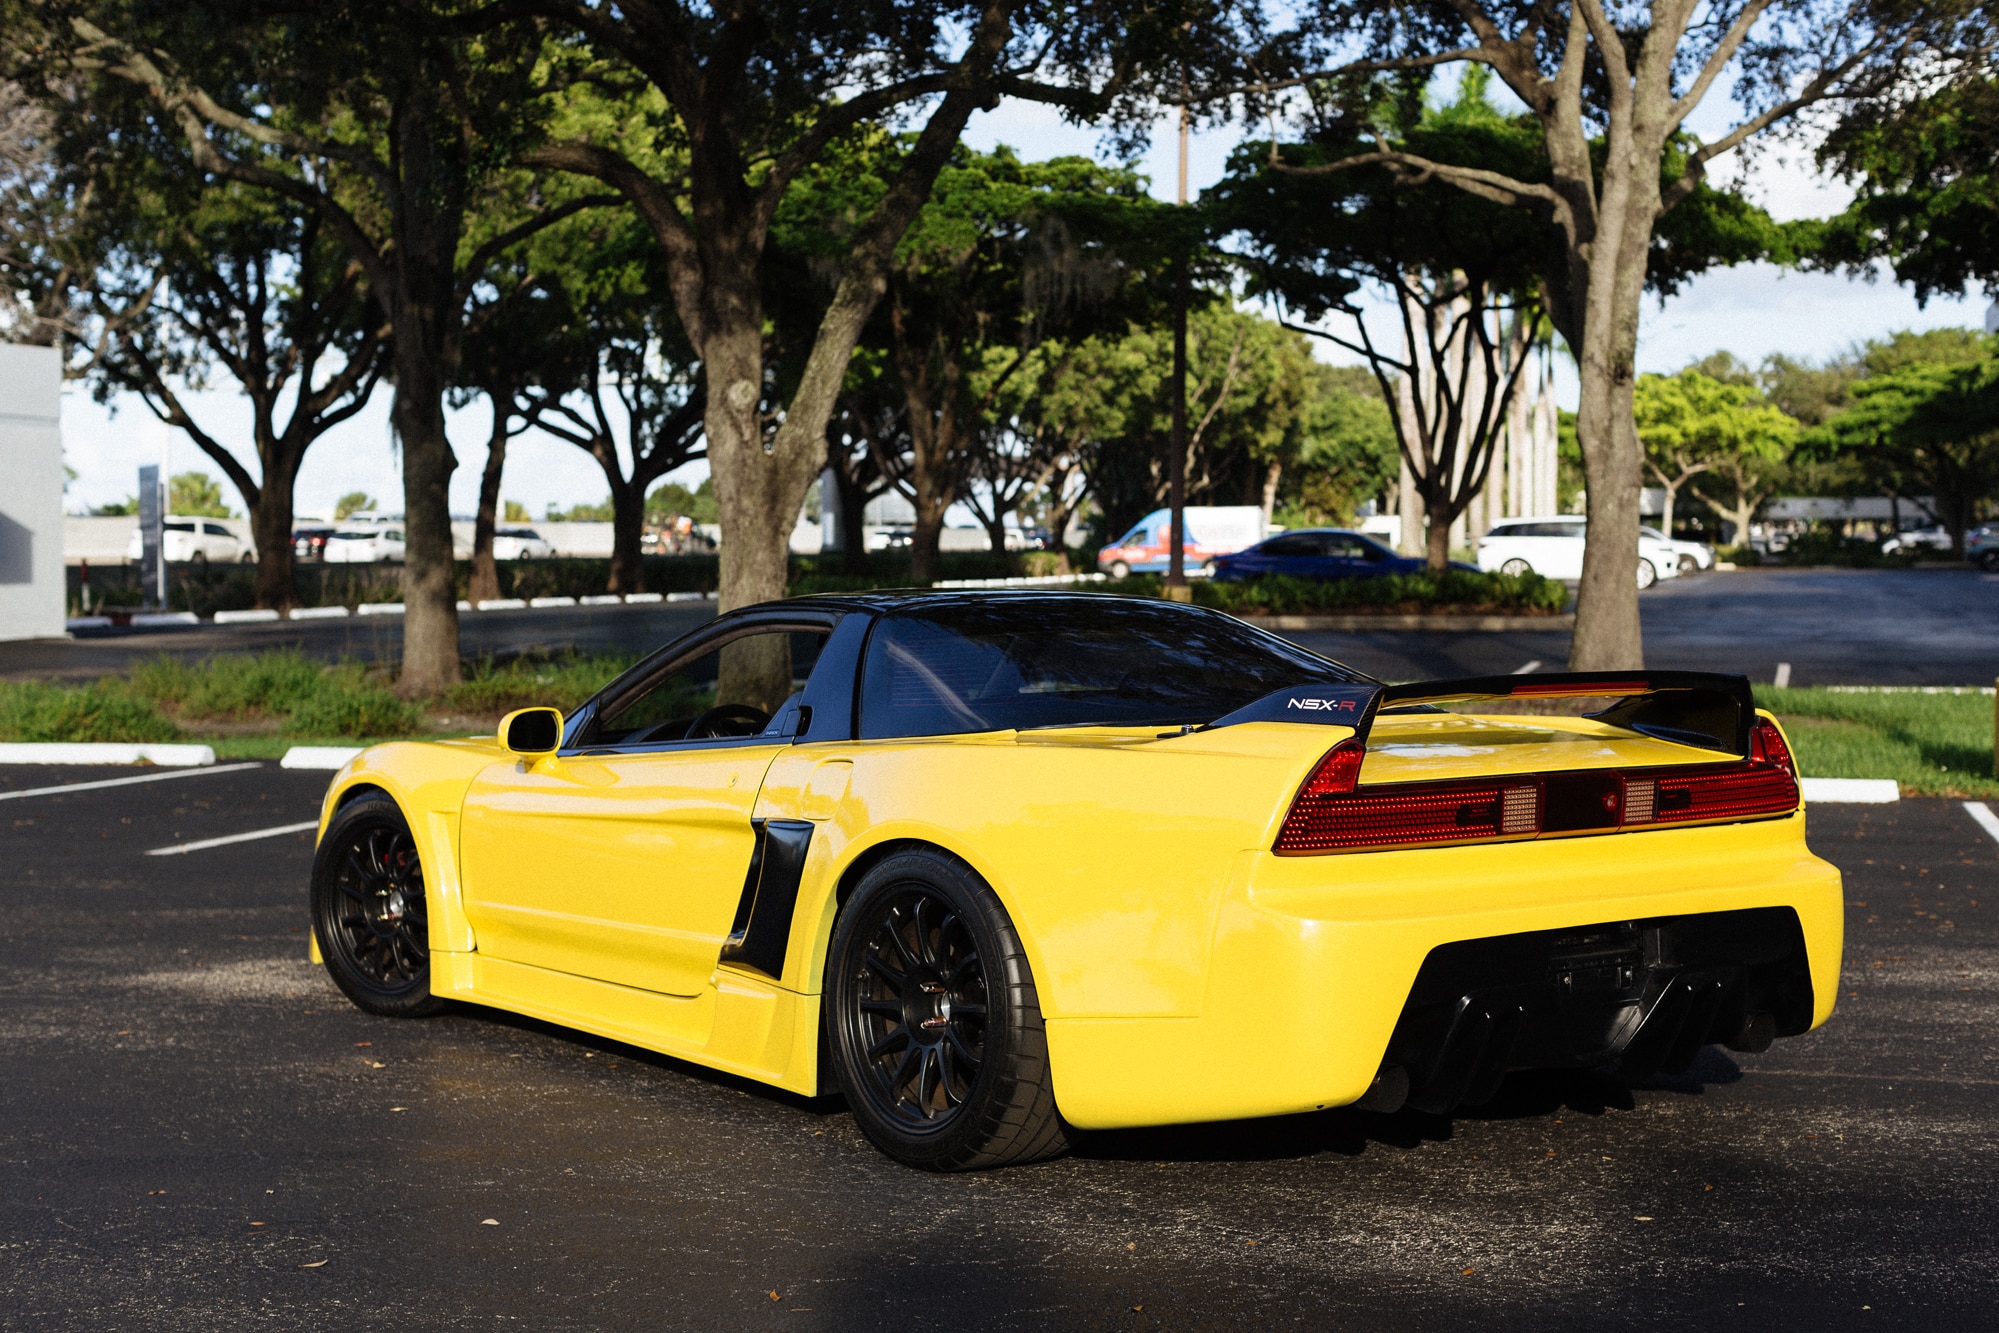 1991 Acura NSX (NA1) | 1 of 1 Factor X Motorsports Widebody | NSX-R Short Gear Set | Tein Coilovers | SSR Type Fs | NA2 Update | Service Records| NSX Prime Ownership History